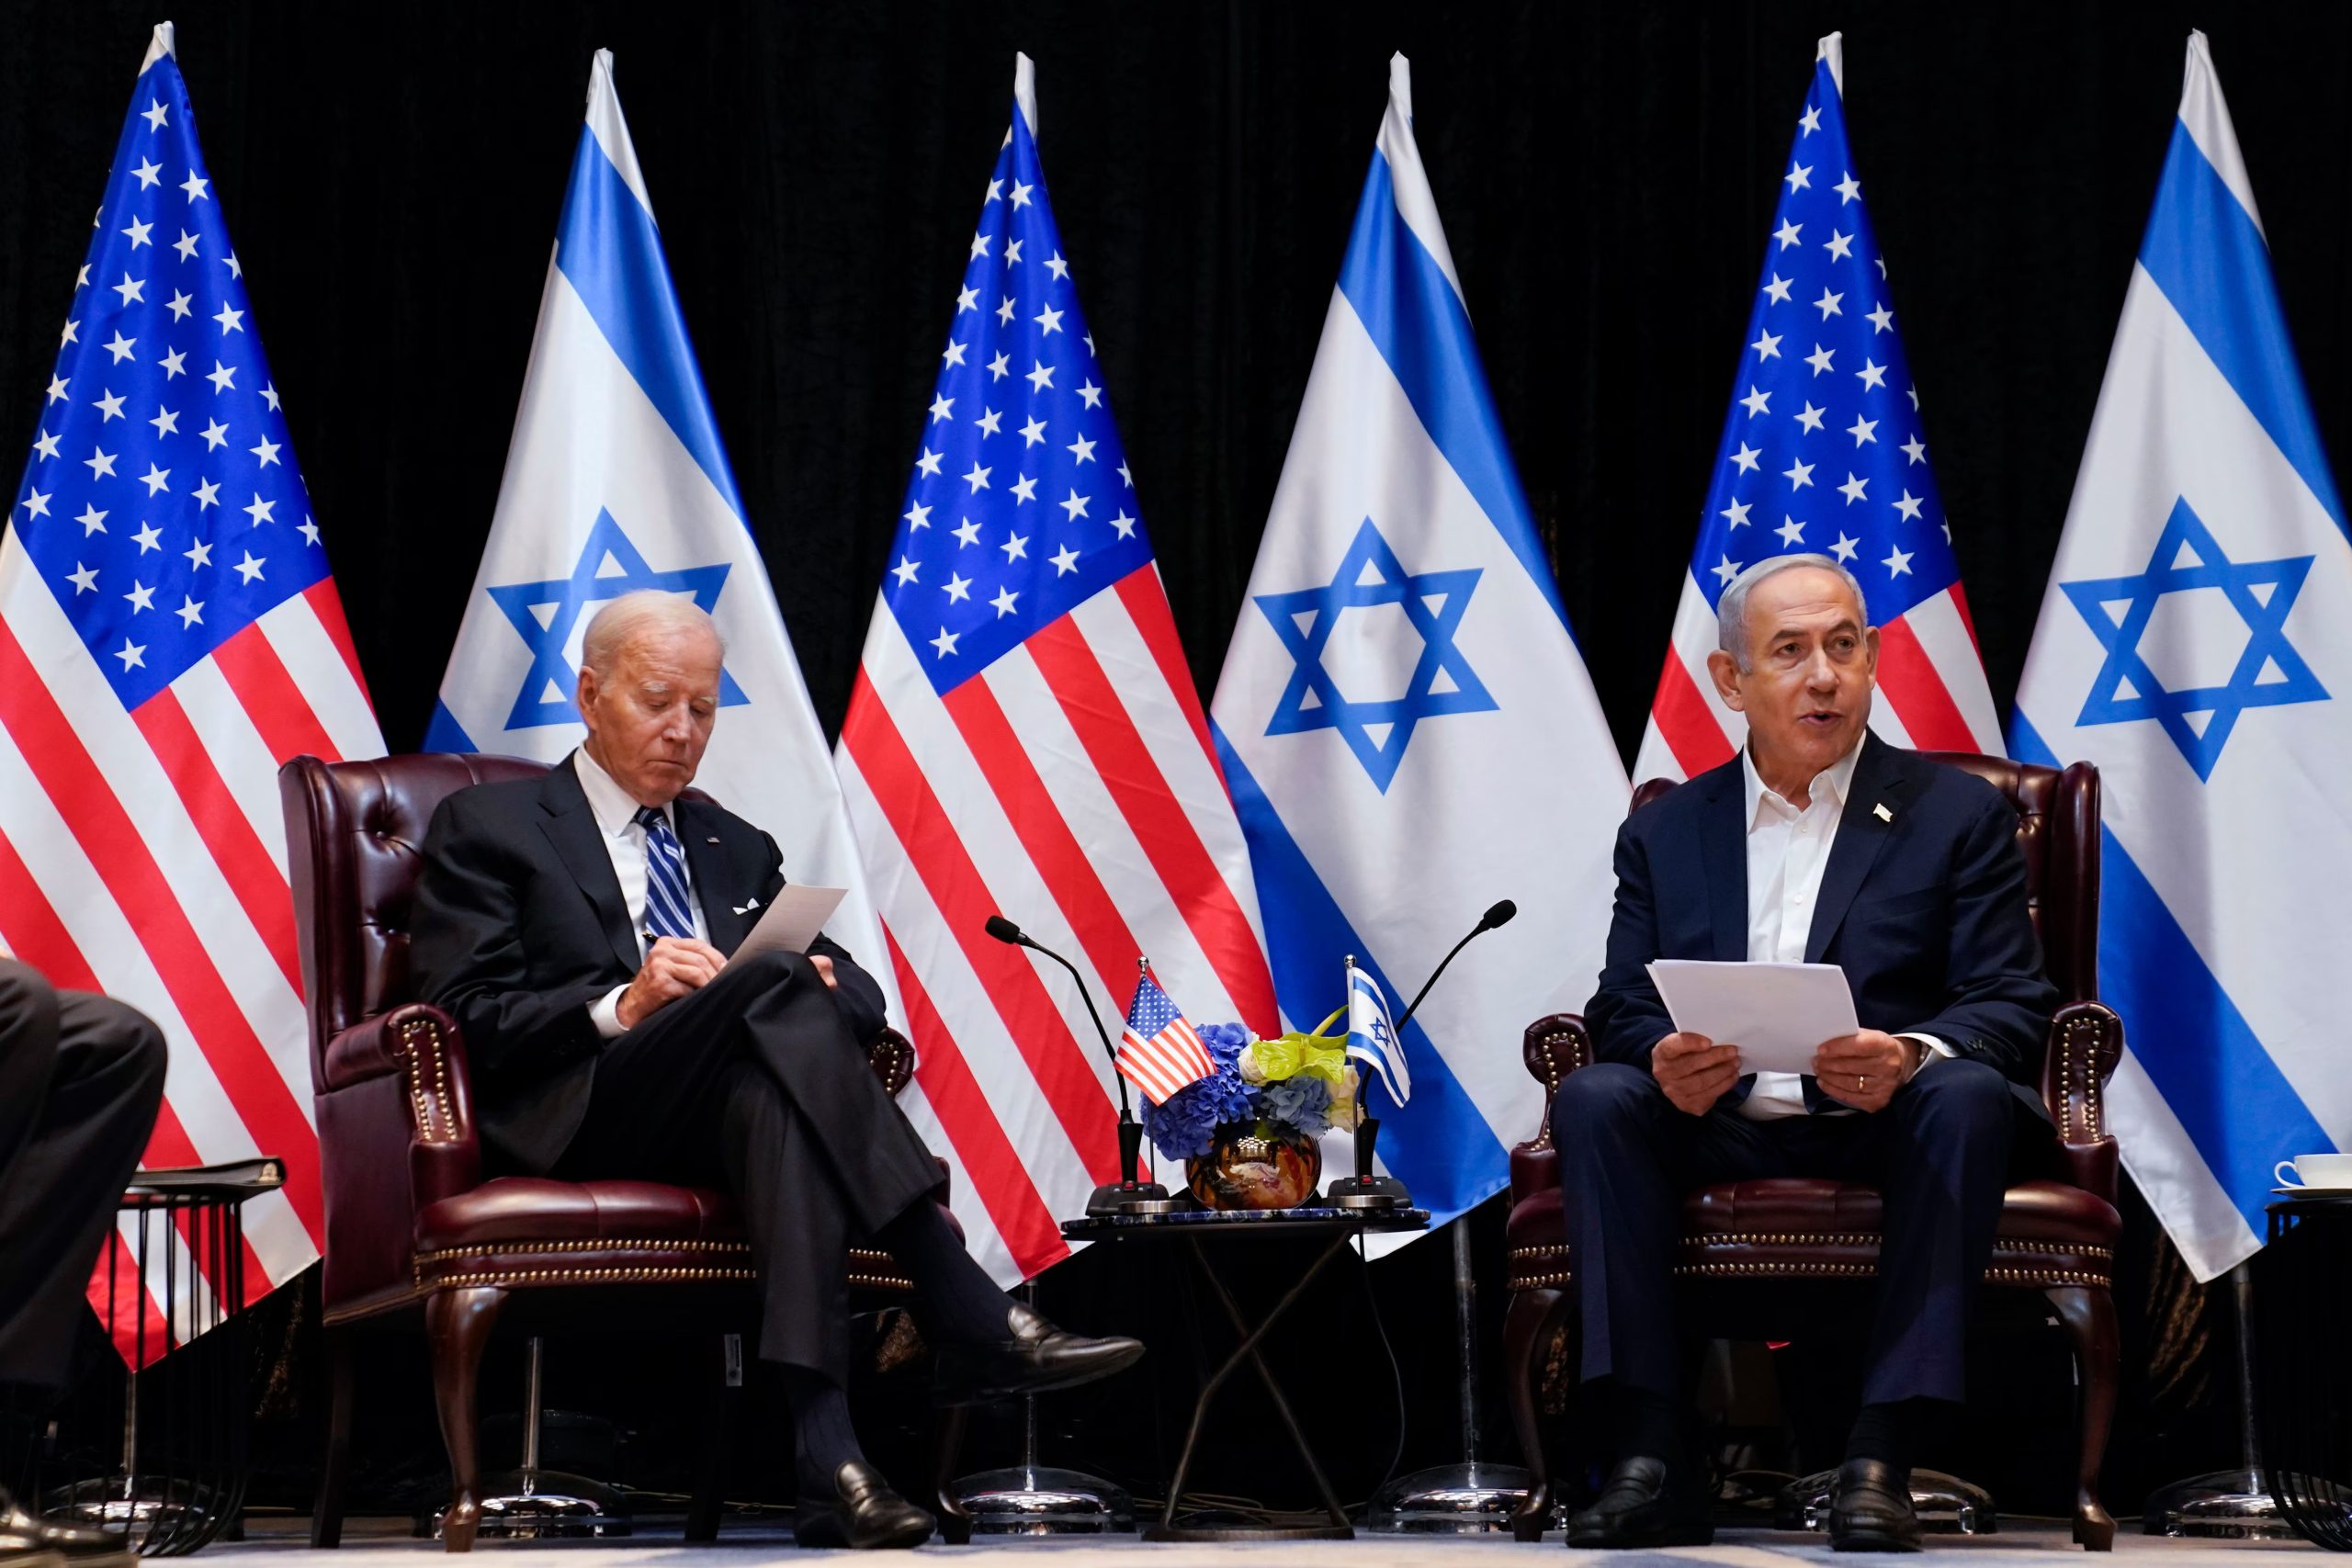 The Washington Post's Report on Biden-Netanyahu Rift Adds to Ongoing Narrative of Tensions Amid Gaza Crisis